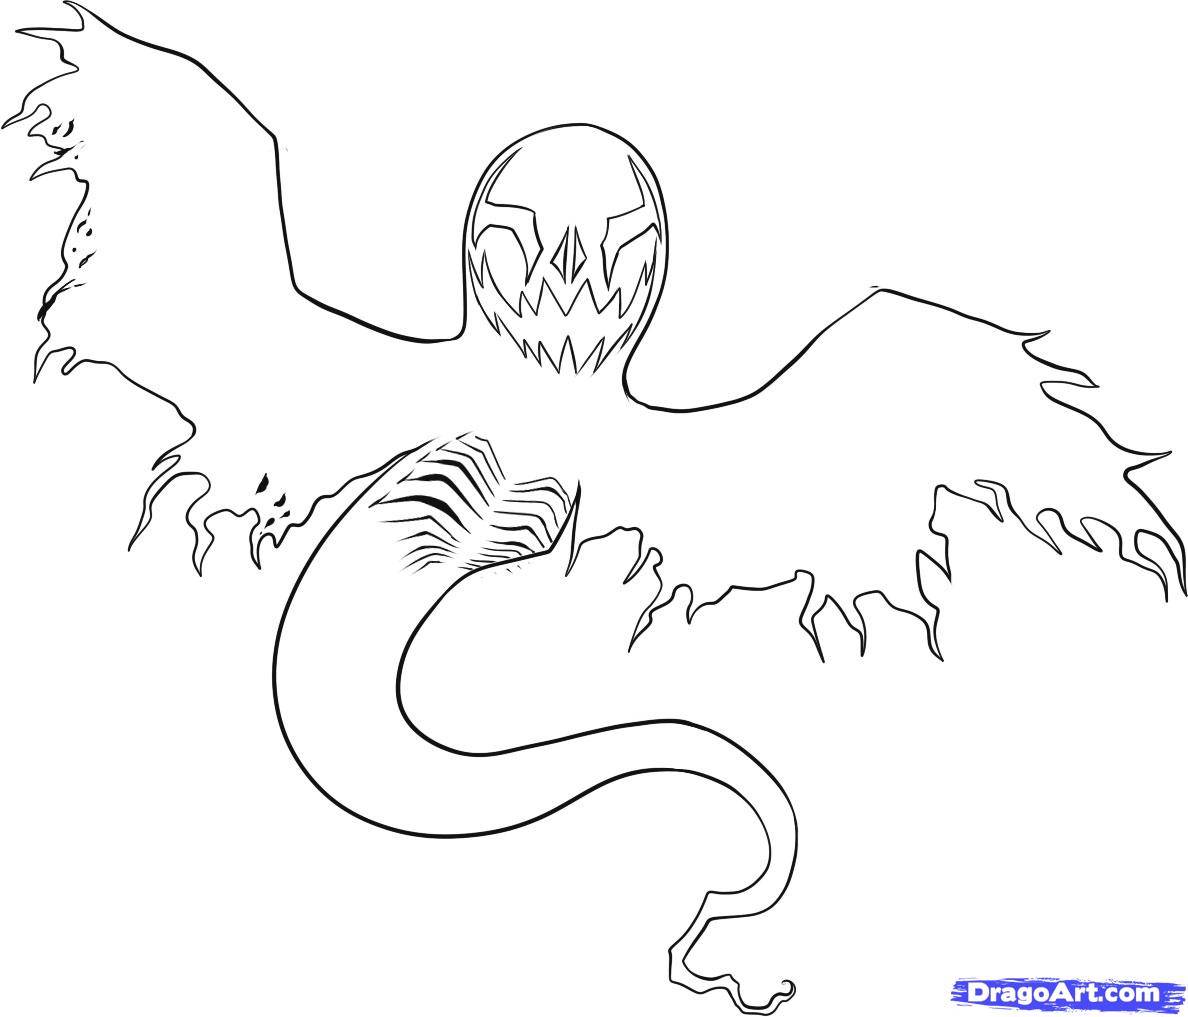 Cool Easy Drawings Pictures | kids drawing coloring page